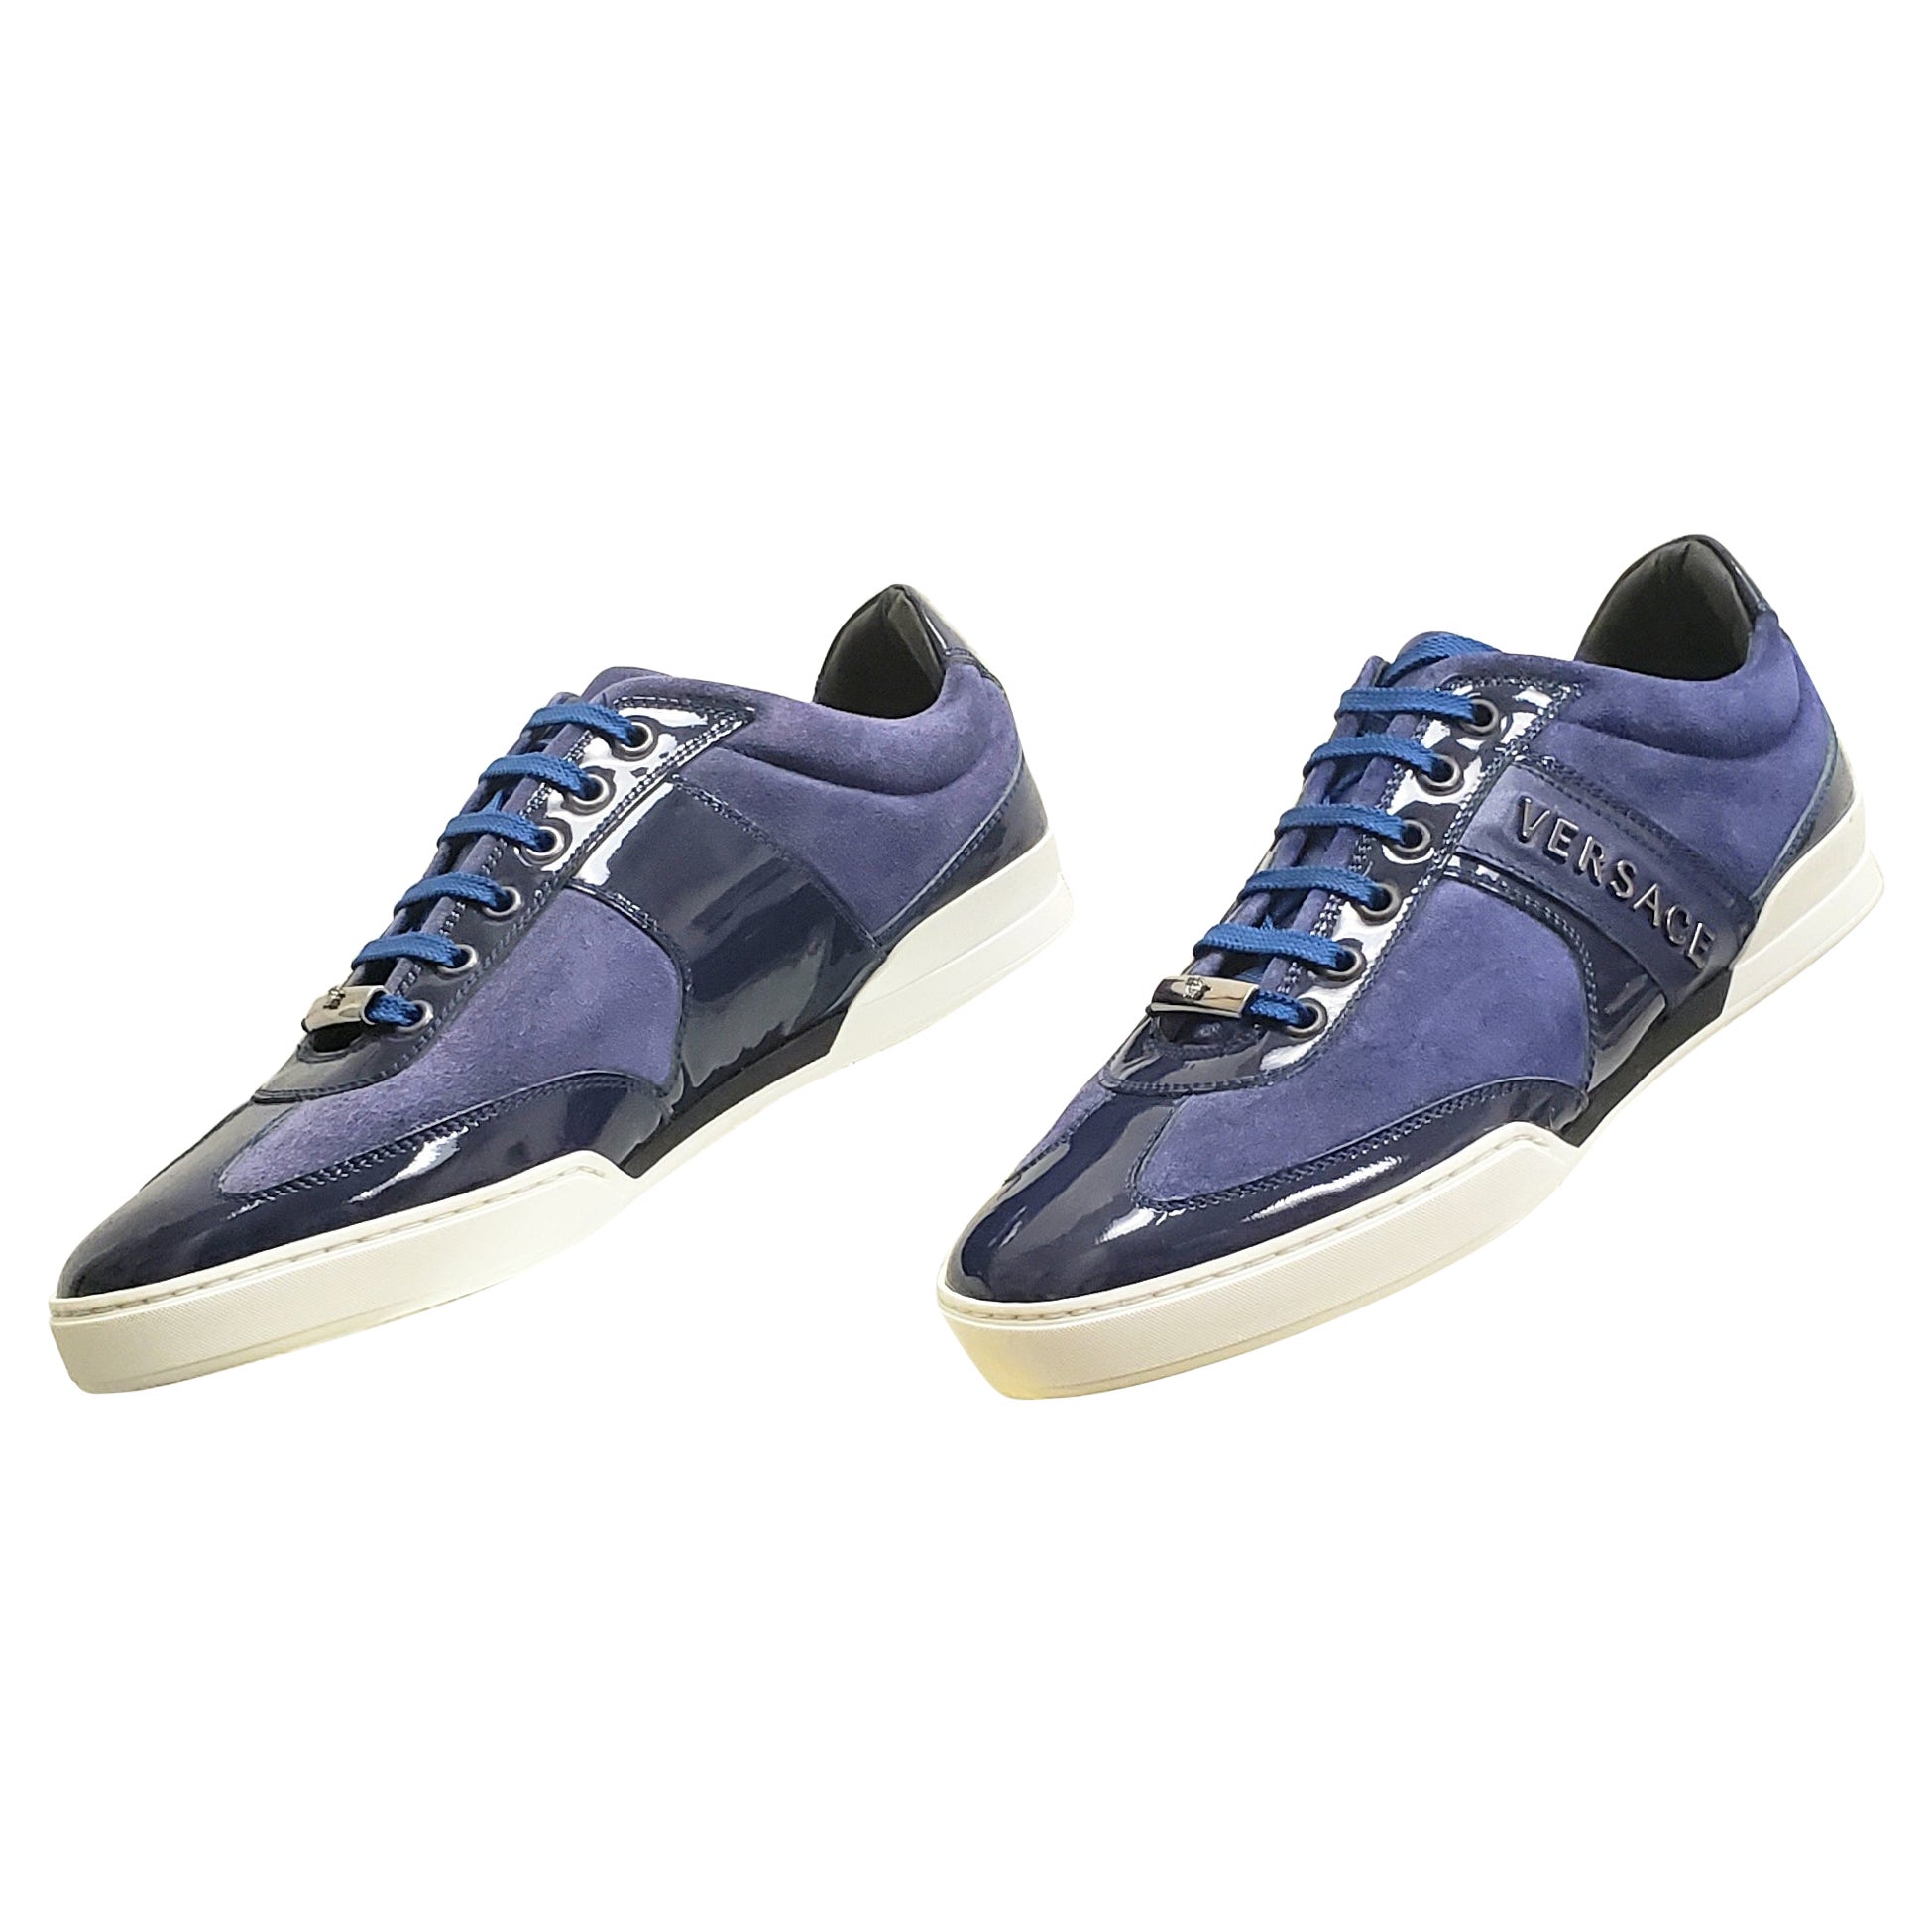 NEW DARK BLUE SUEDE LEATHER SNEAKERS w/PATENT LEATHER DETAILS 40 - 7